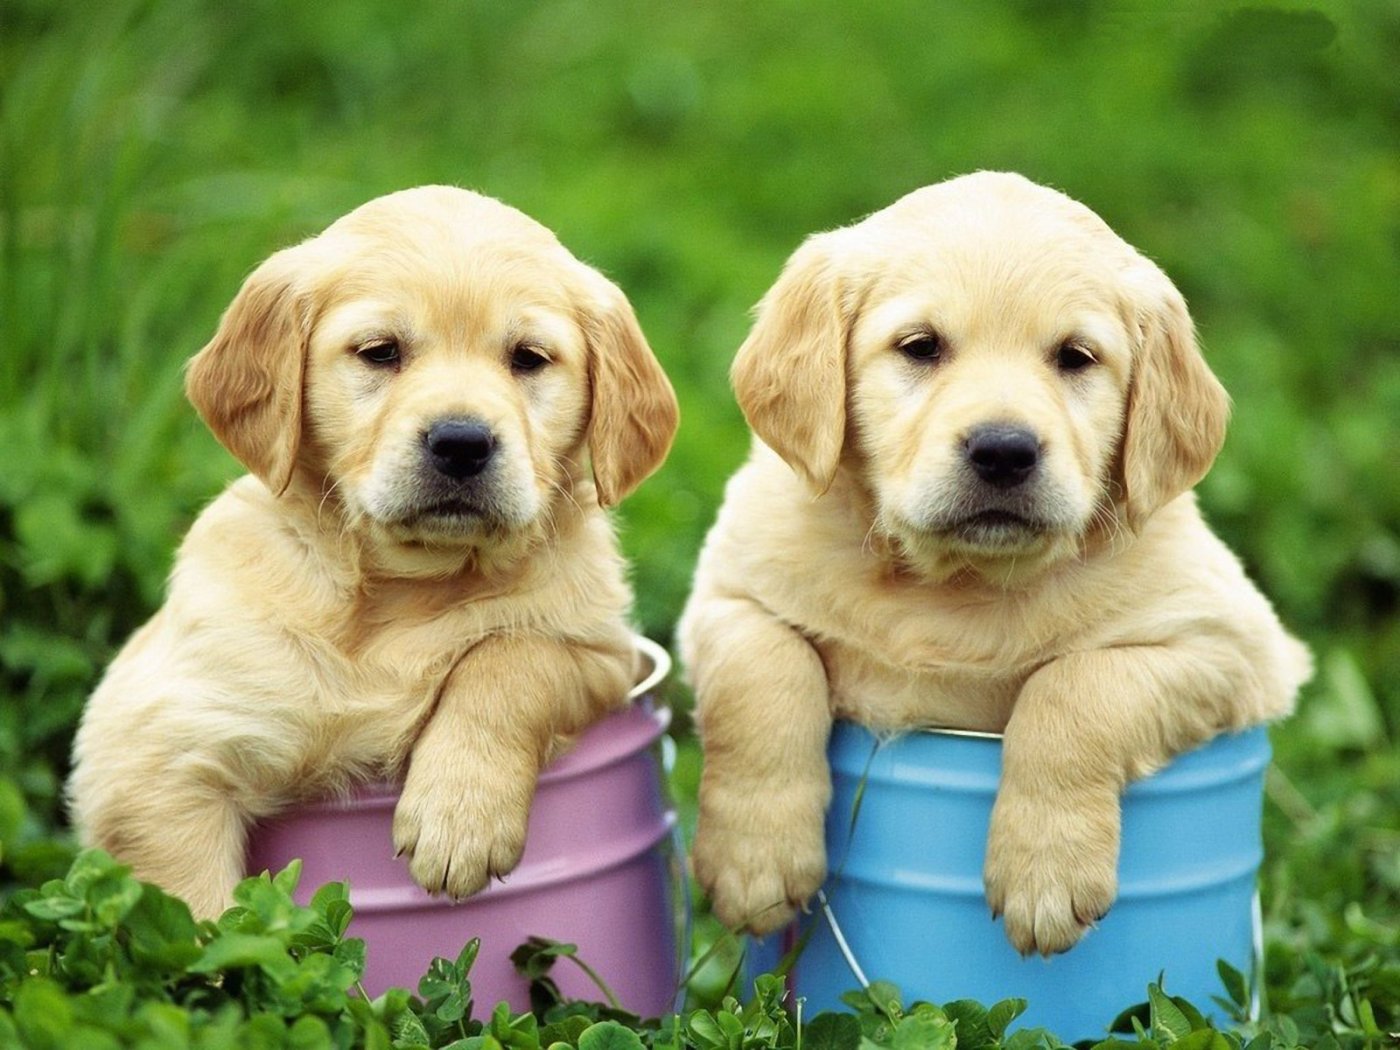 Two Cute Golden Retriever Puppies Photo And Wallpaper